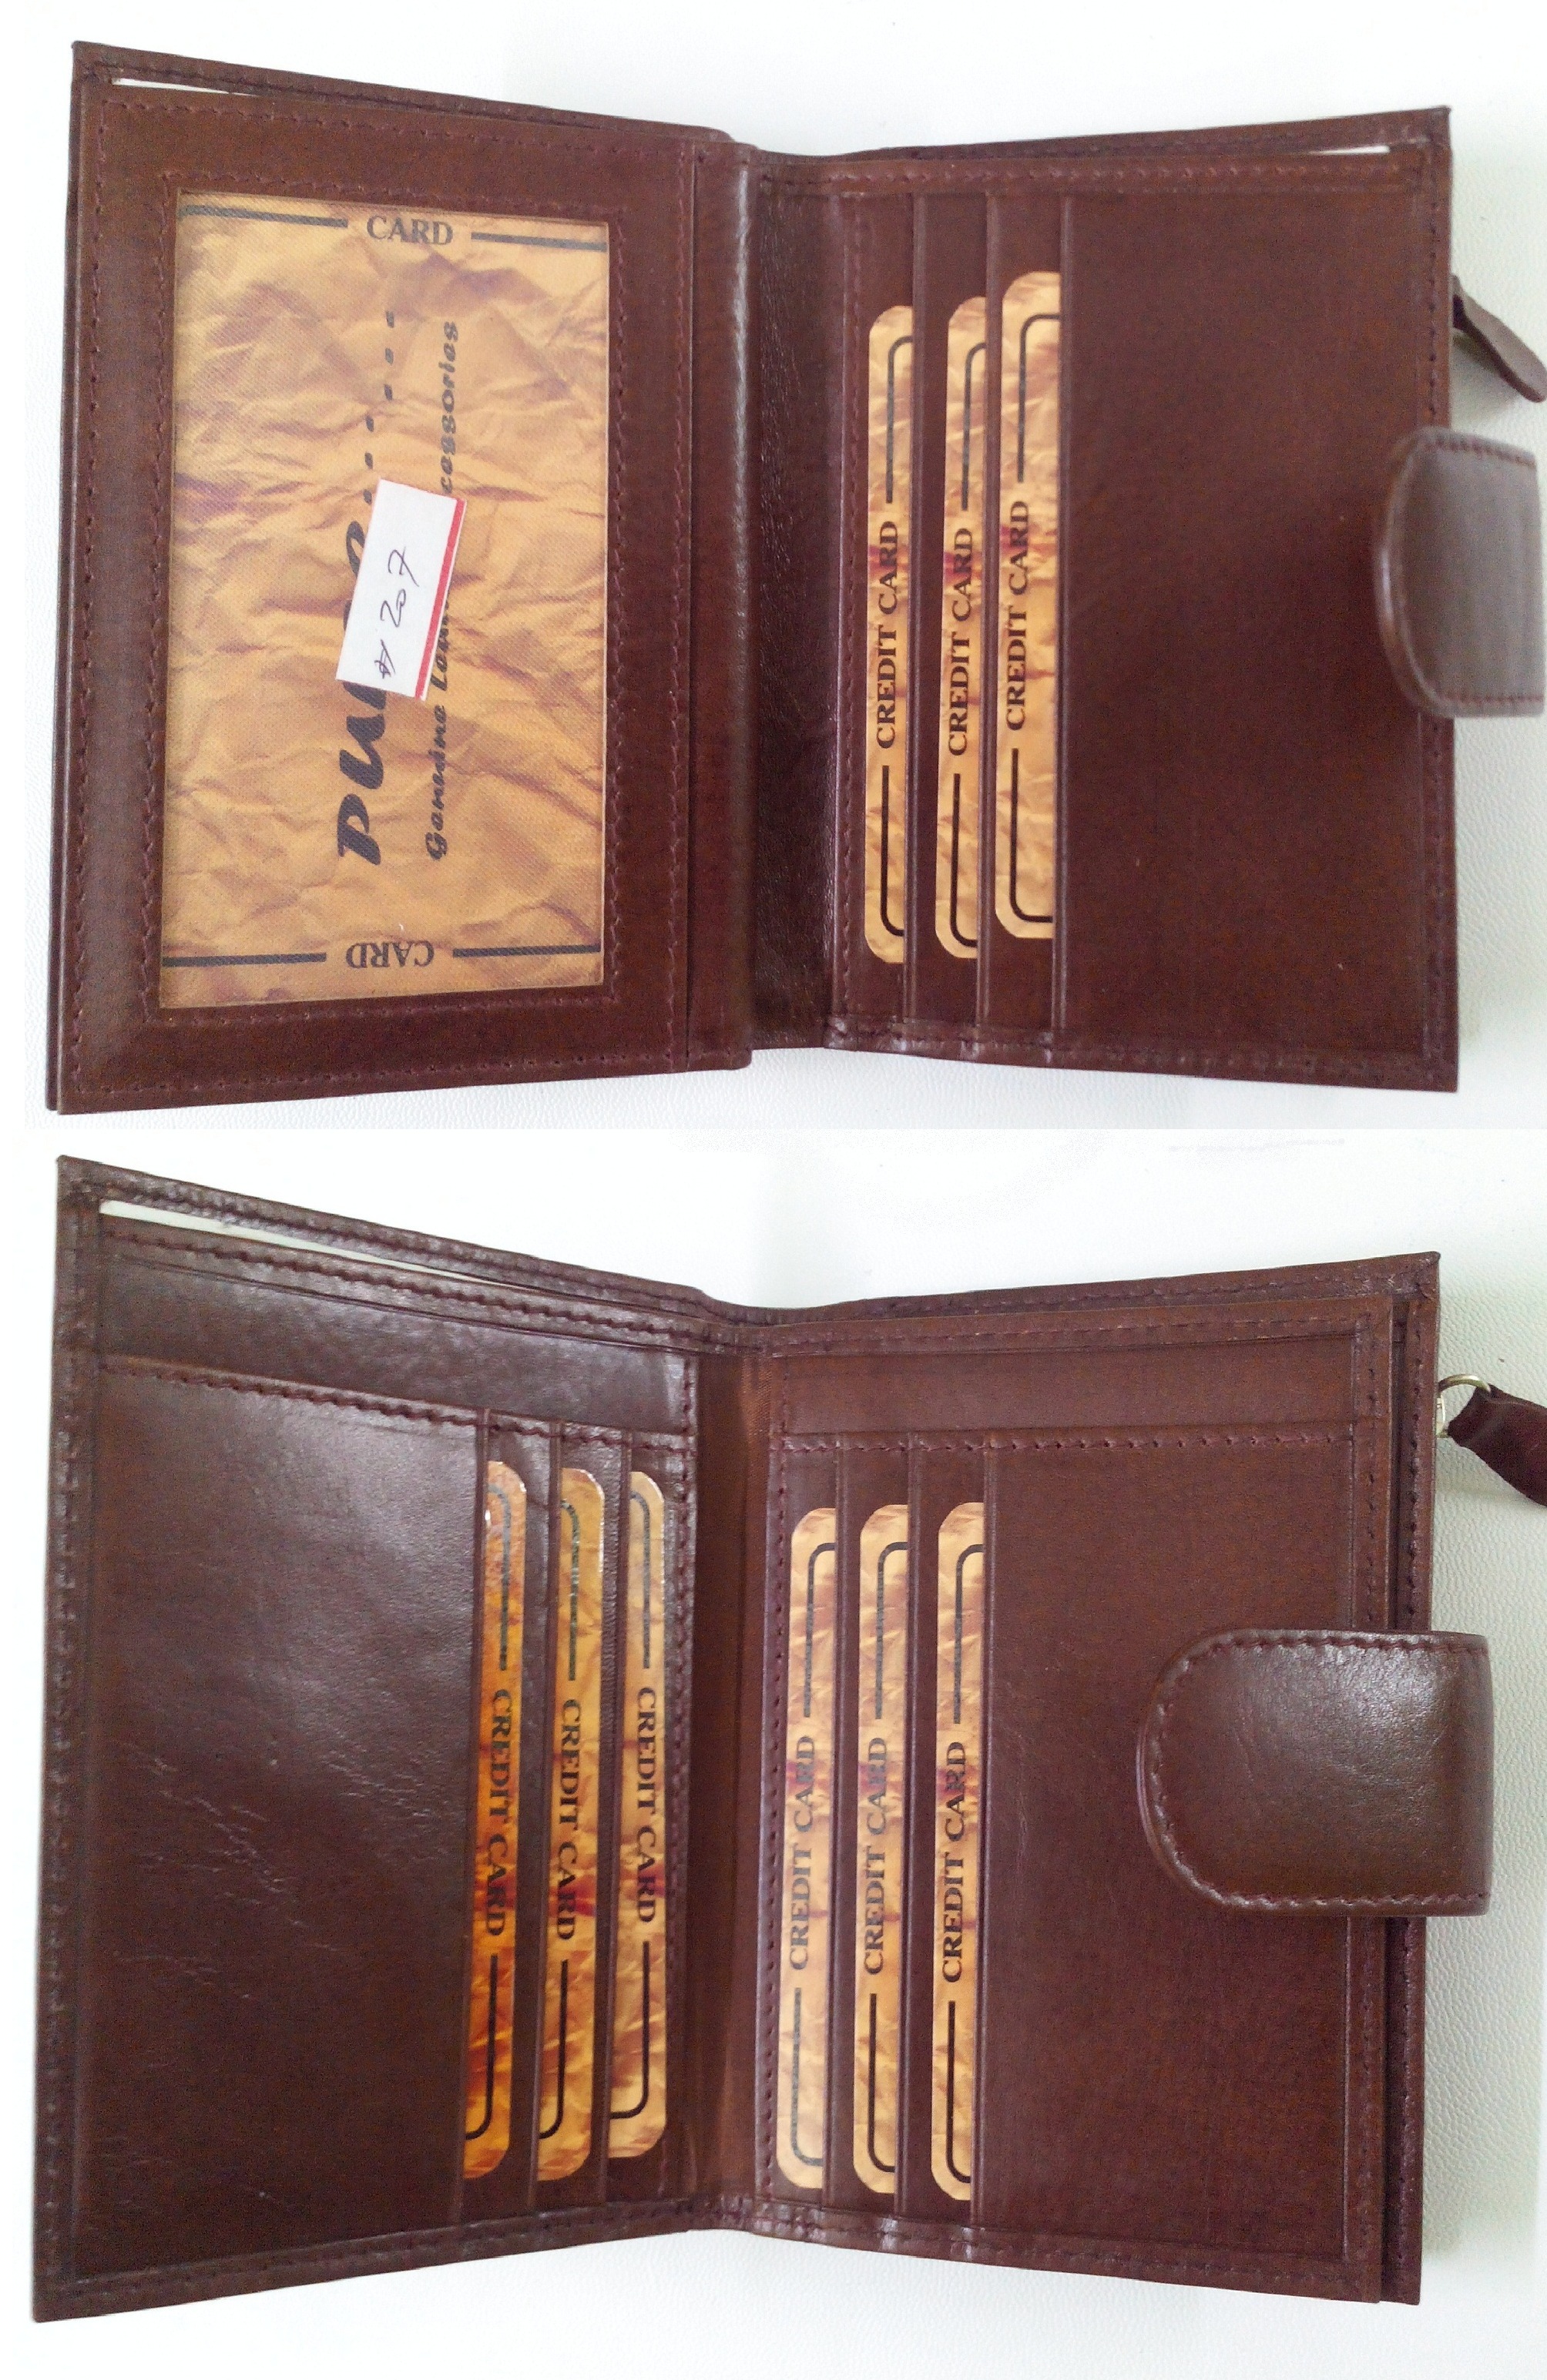 Maxi Leather Wallets